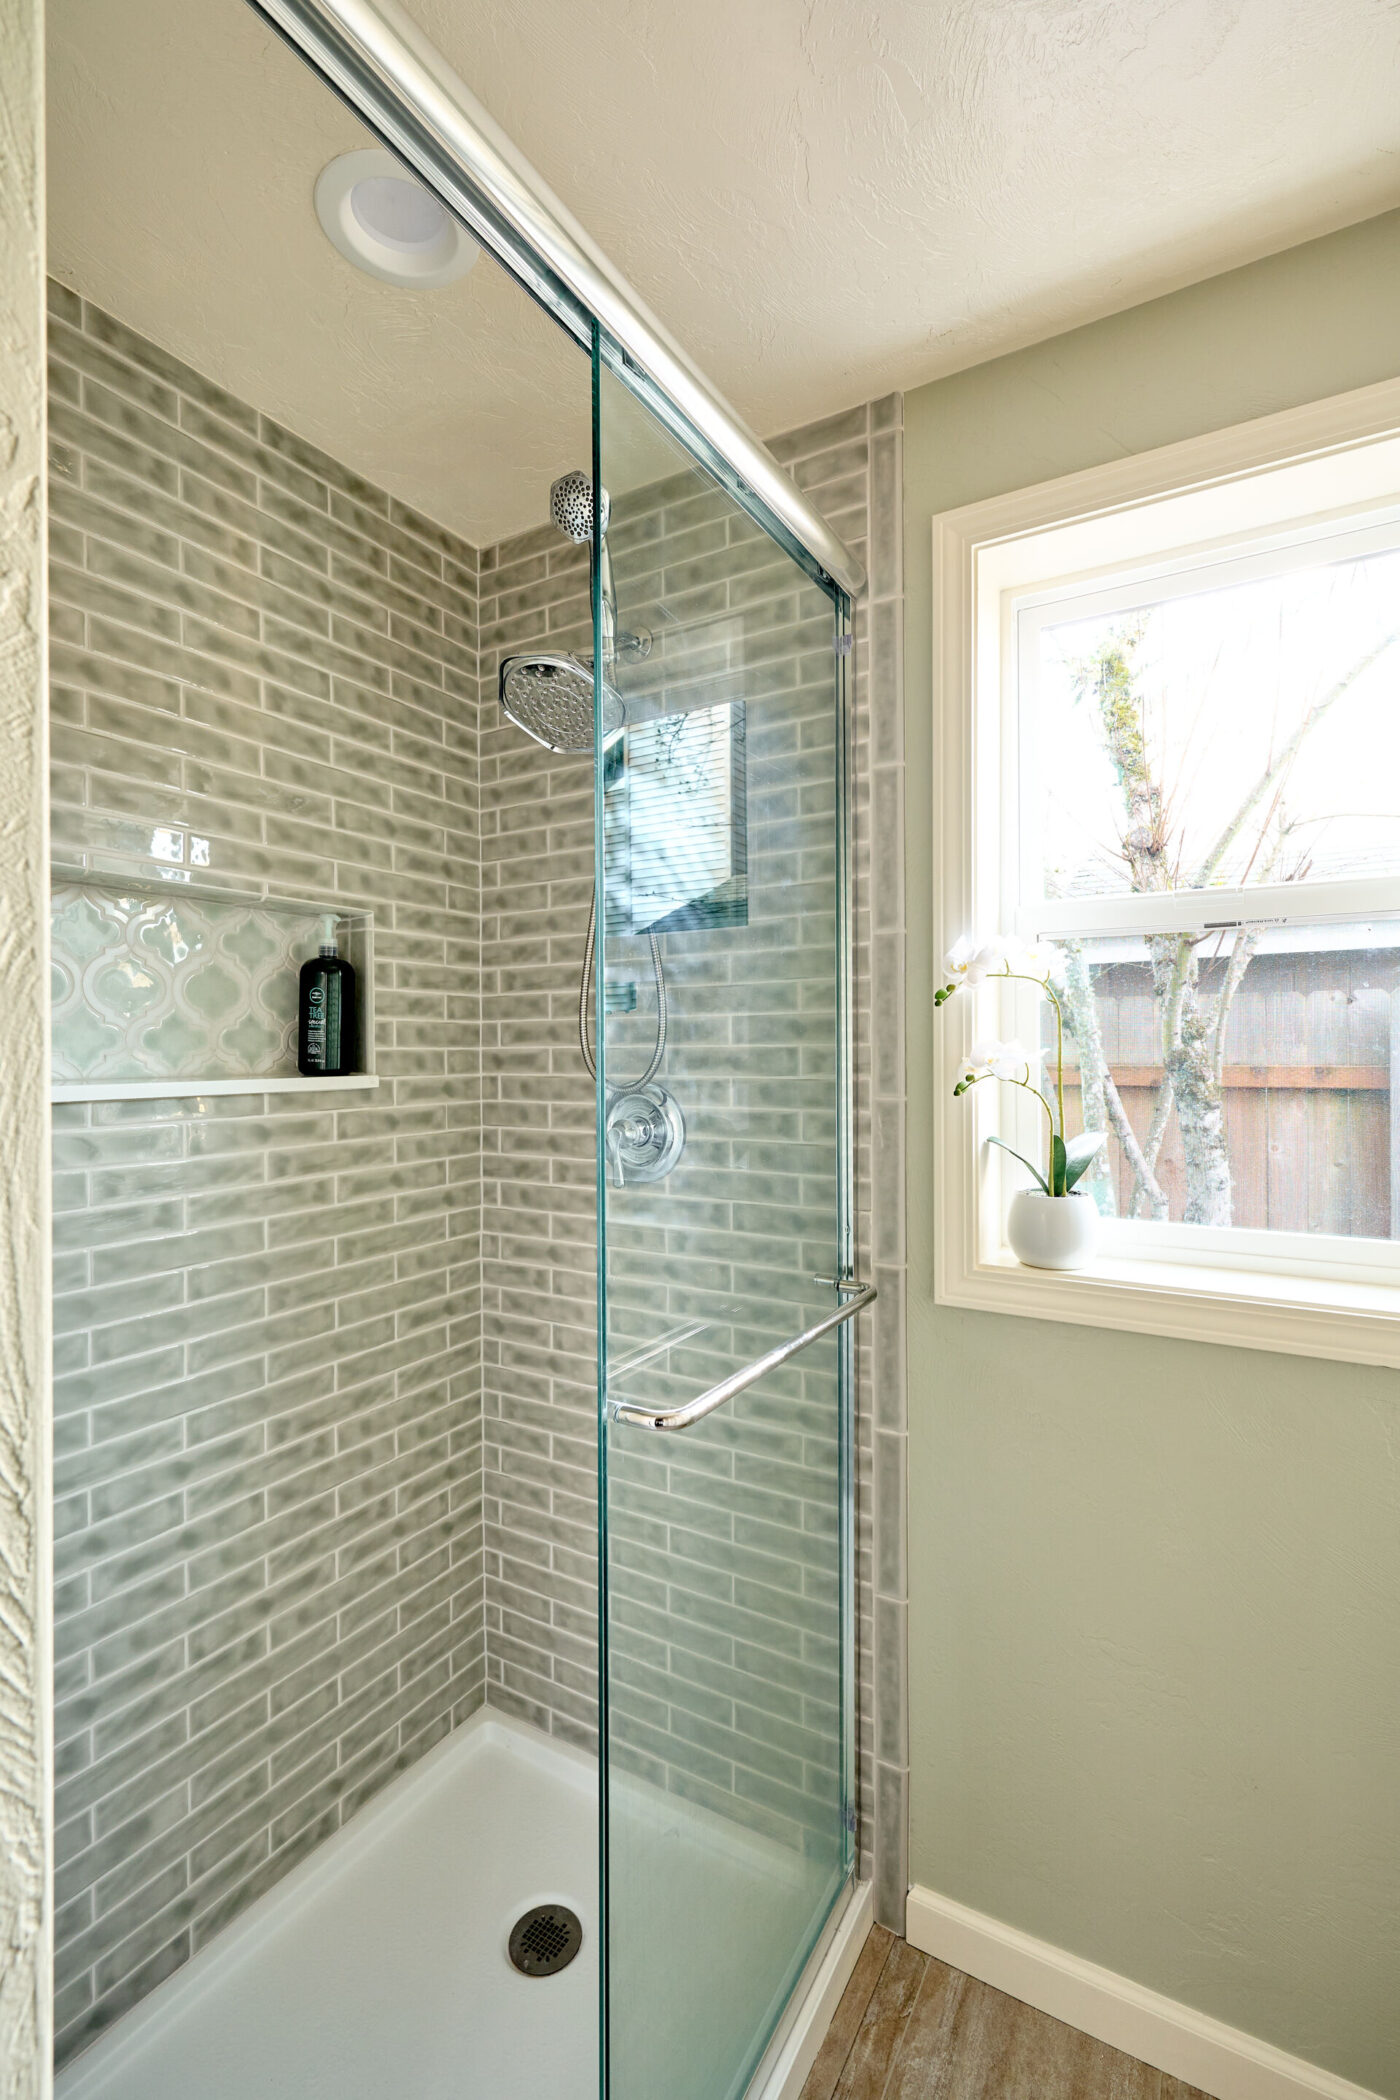 Ceramic tiling and glass shower enclosure in guest bath addition by Powell Construction of Corvallis OR